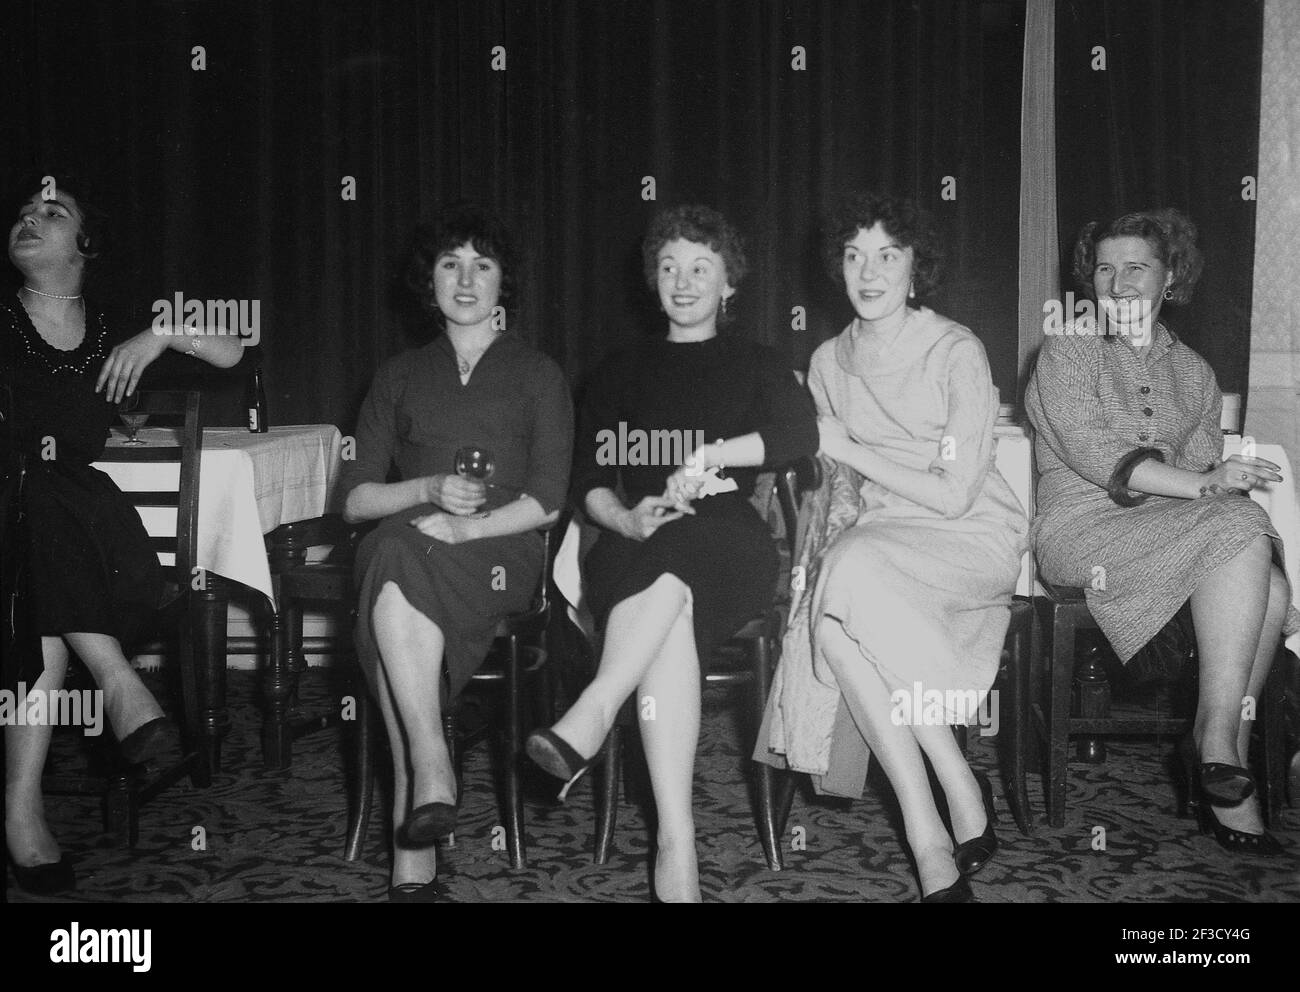 1957, historical, evening time and four young ladies in the female fashions of the era sitting on chairs in a function room of the Victoria hotel at an office party, perhaps by the amusing look on their faces, watching others dance, Leeds, England, UK. Stock Photo